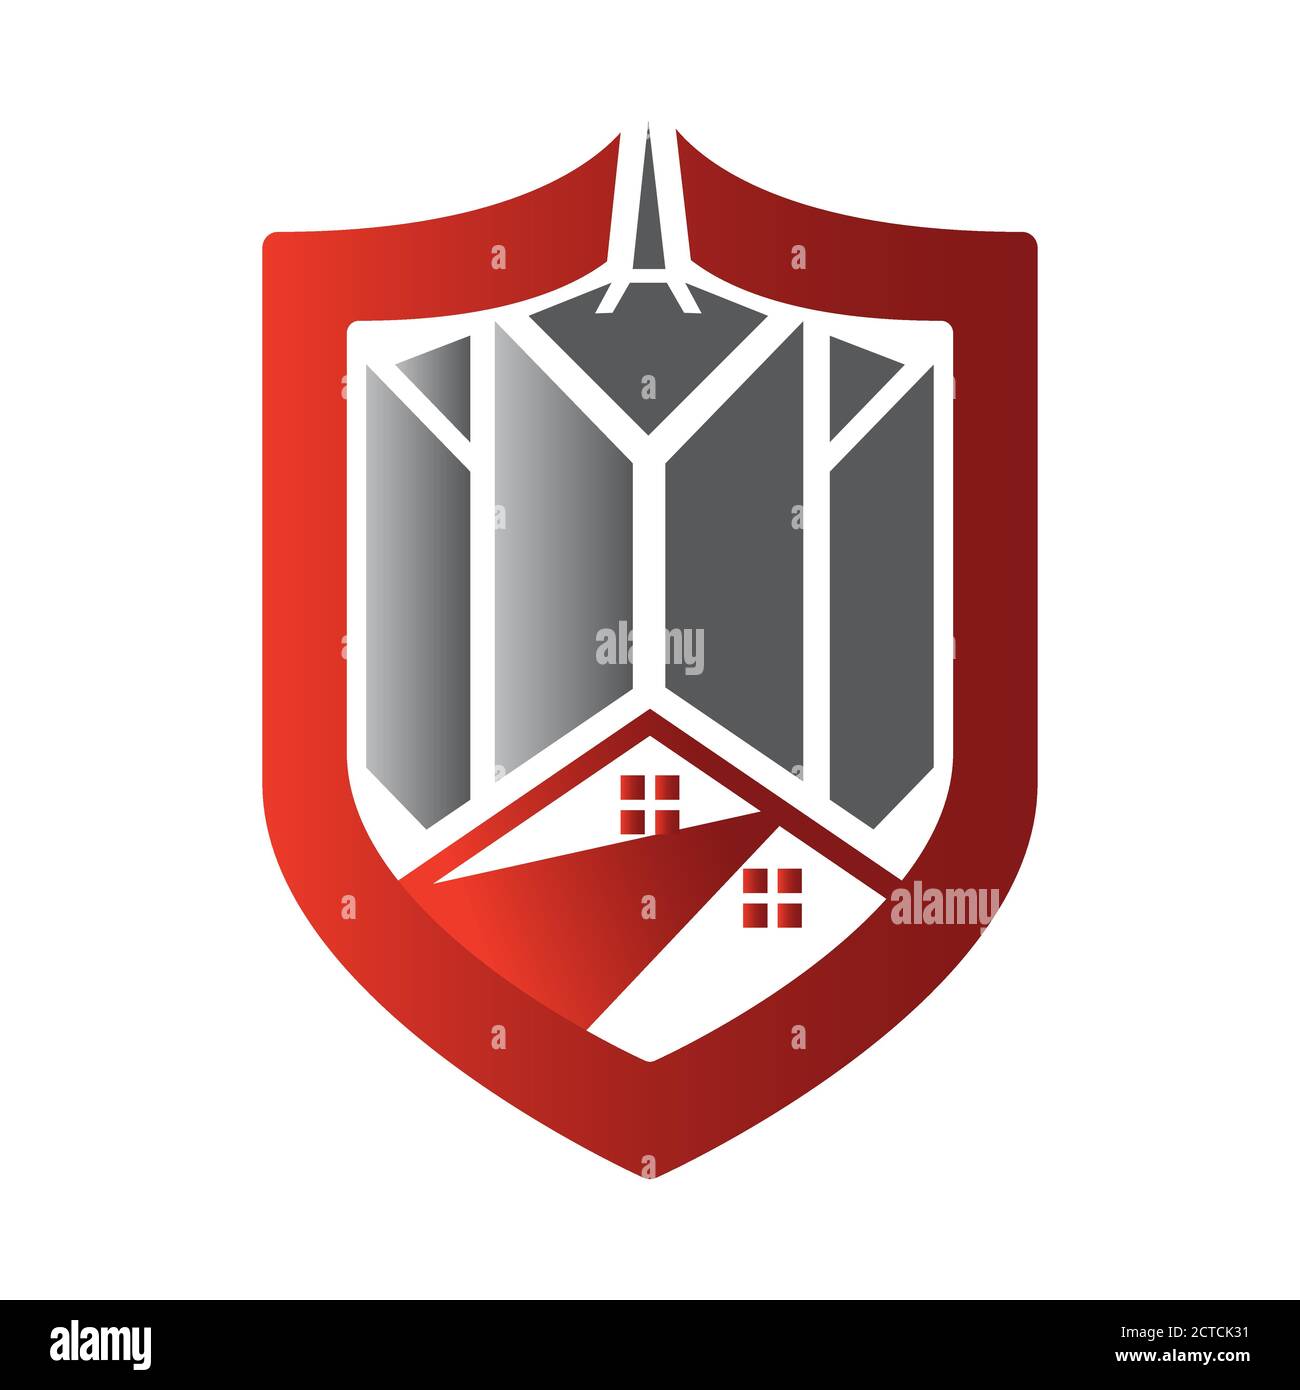 Abstract shield and building security logo icon symbol of security protection maintenance company Stock Vector